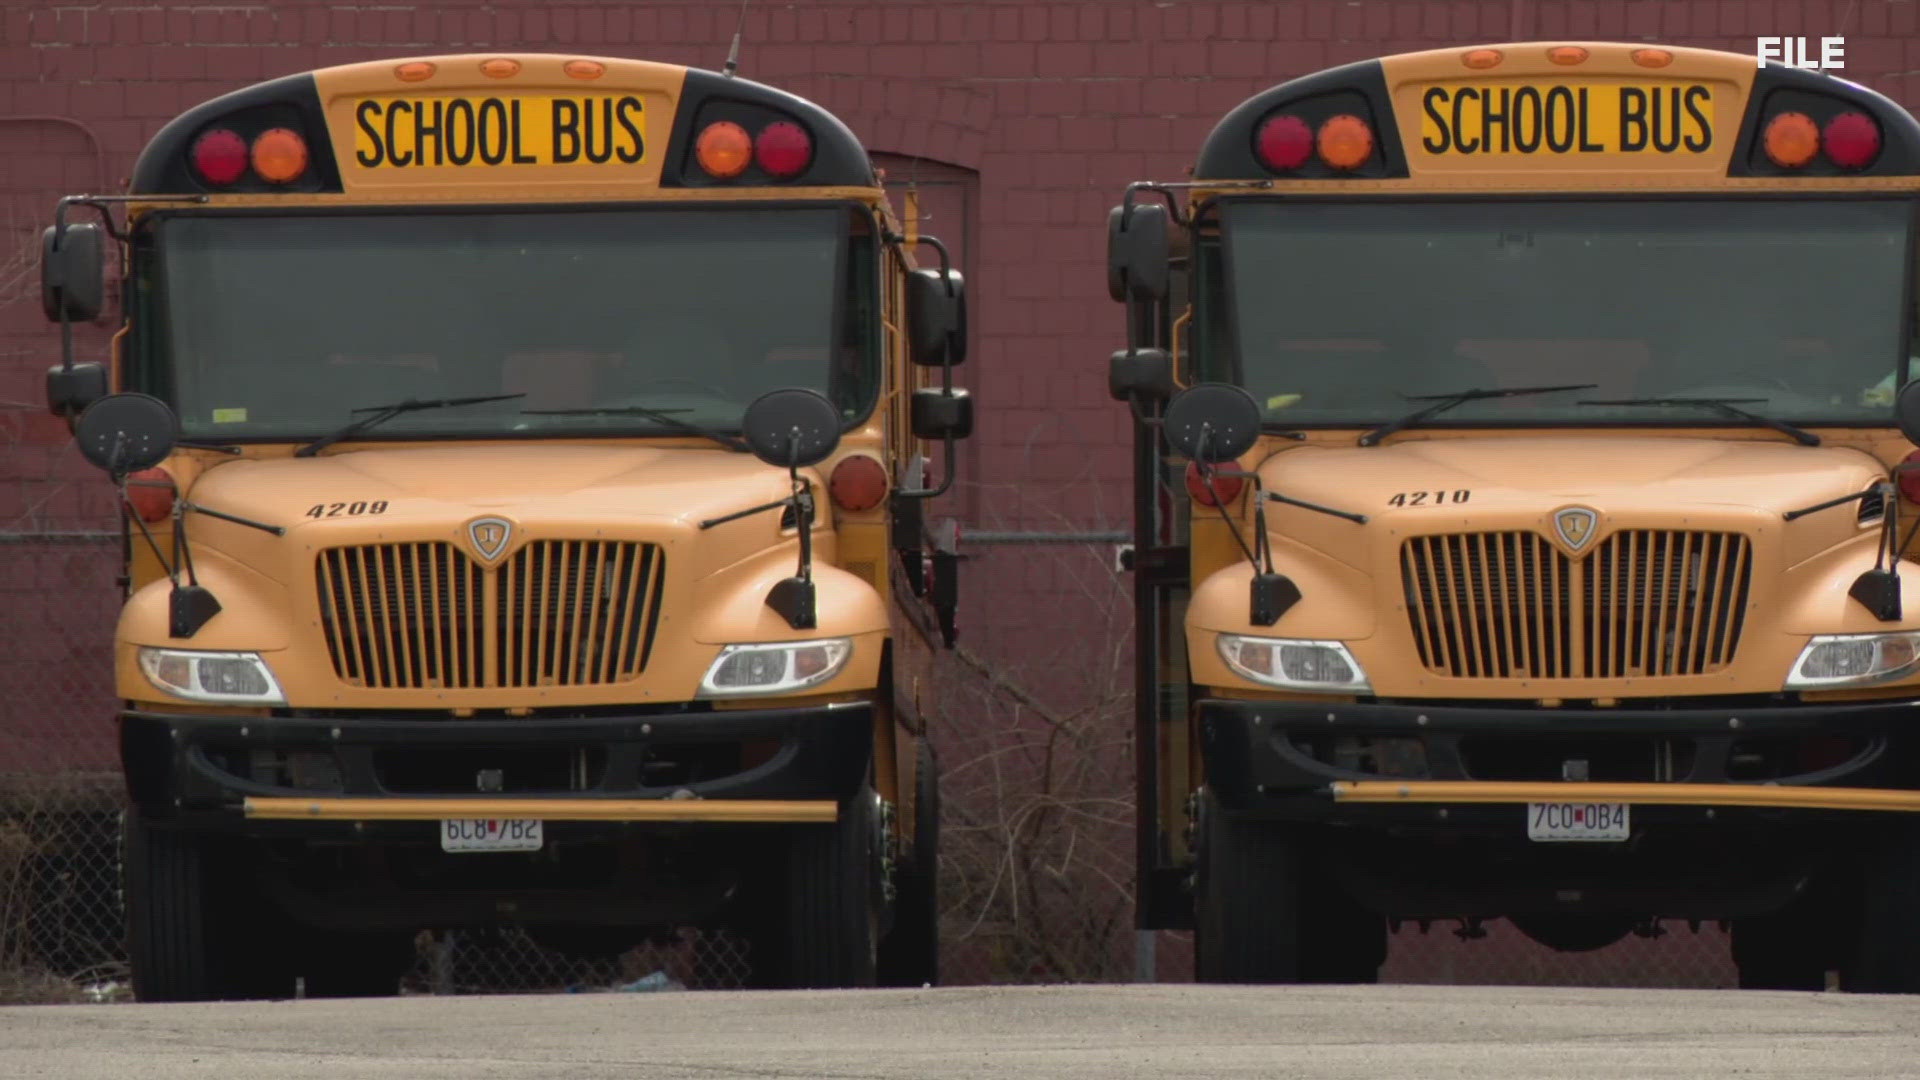 Saint Louis Public Schools released a statement saying it could not provide transportation for students participating in after-school sports activities late Monday.